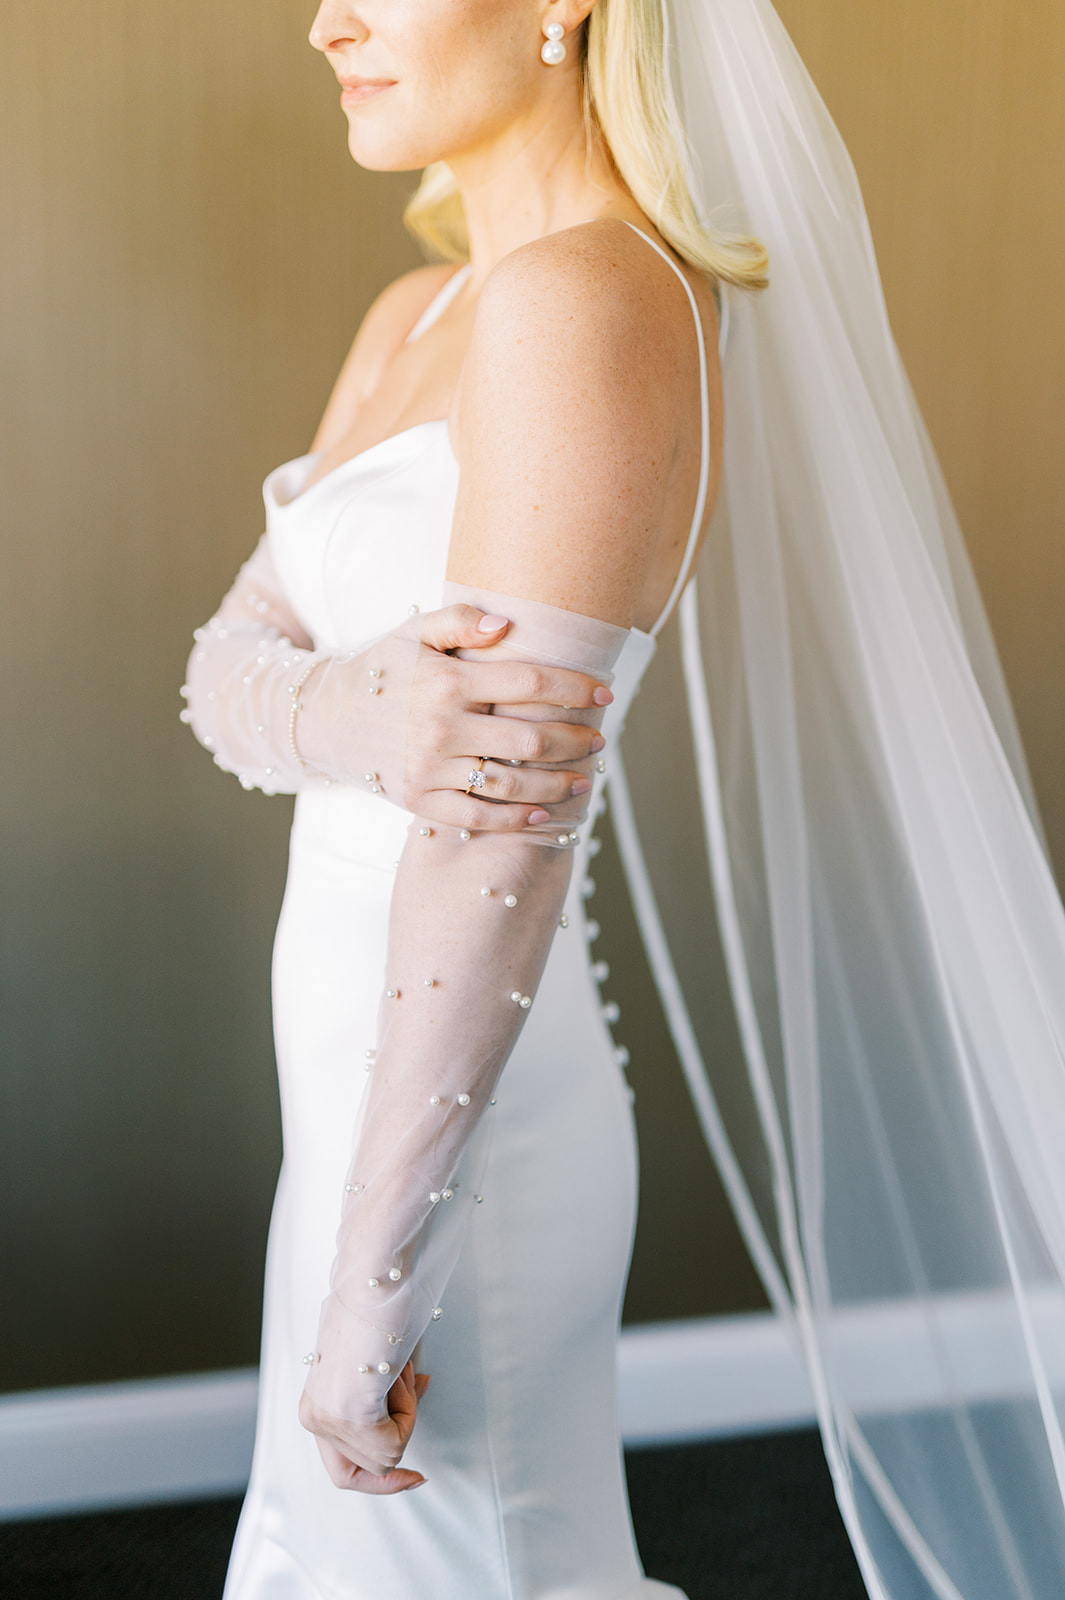 sheer white gloves with pearl accents on chic bride in sleek white gown at The Logan in Philadelphia, PA